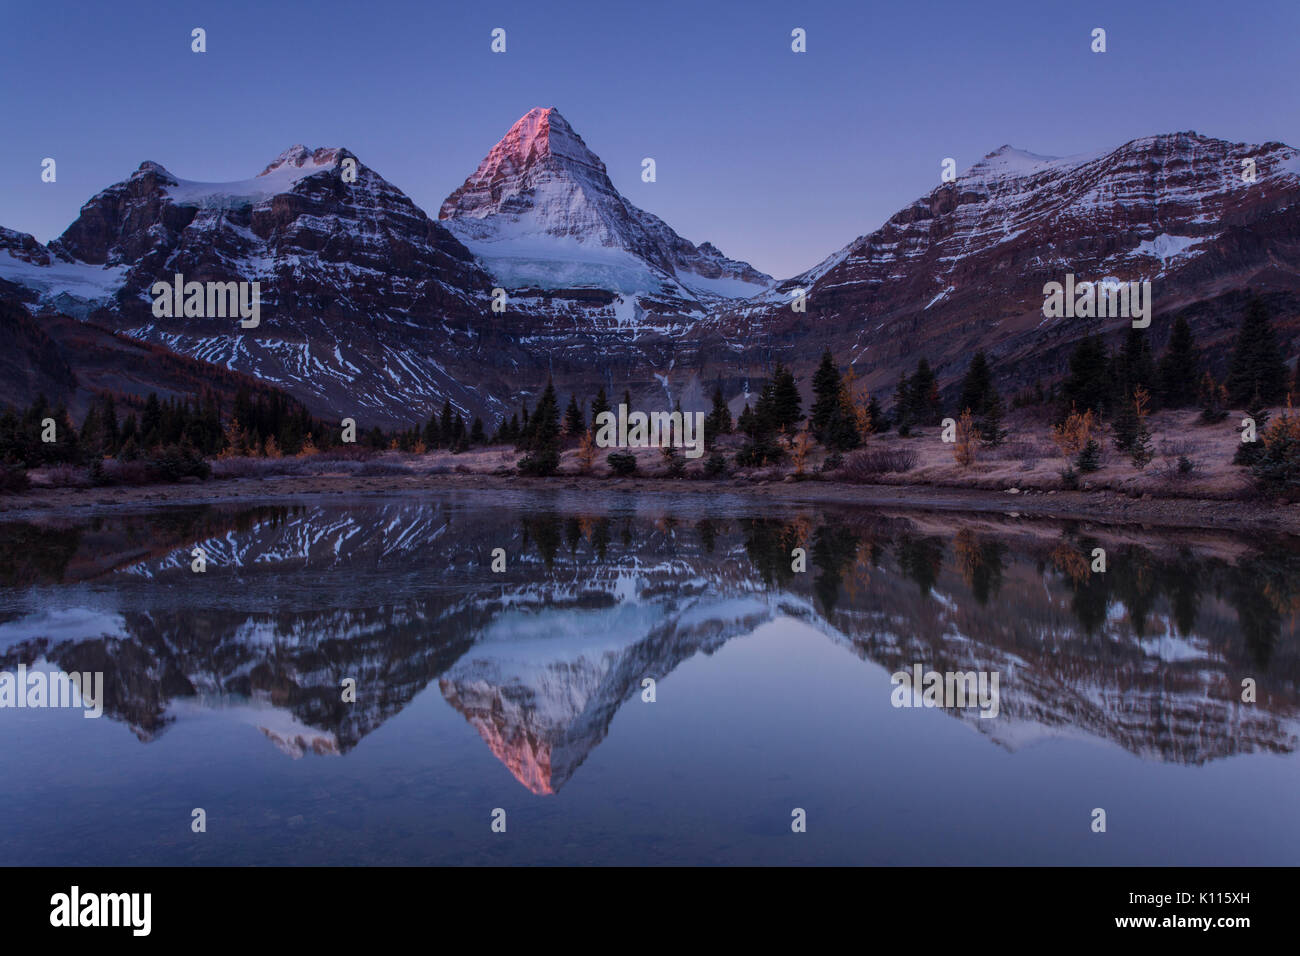 Early light on Mount Assiniboine reflected in a tarn near Lage Magog before sunrise, Mount Assiniboine Provincial Park, Rocky Mountains, British Colum Stock Photo